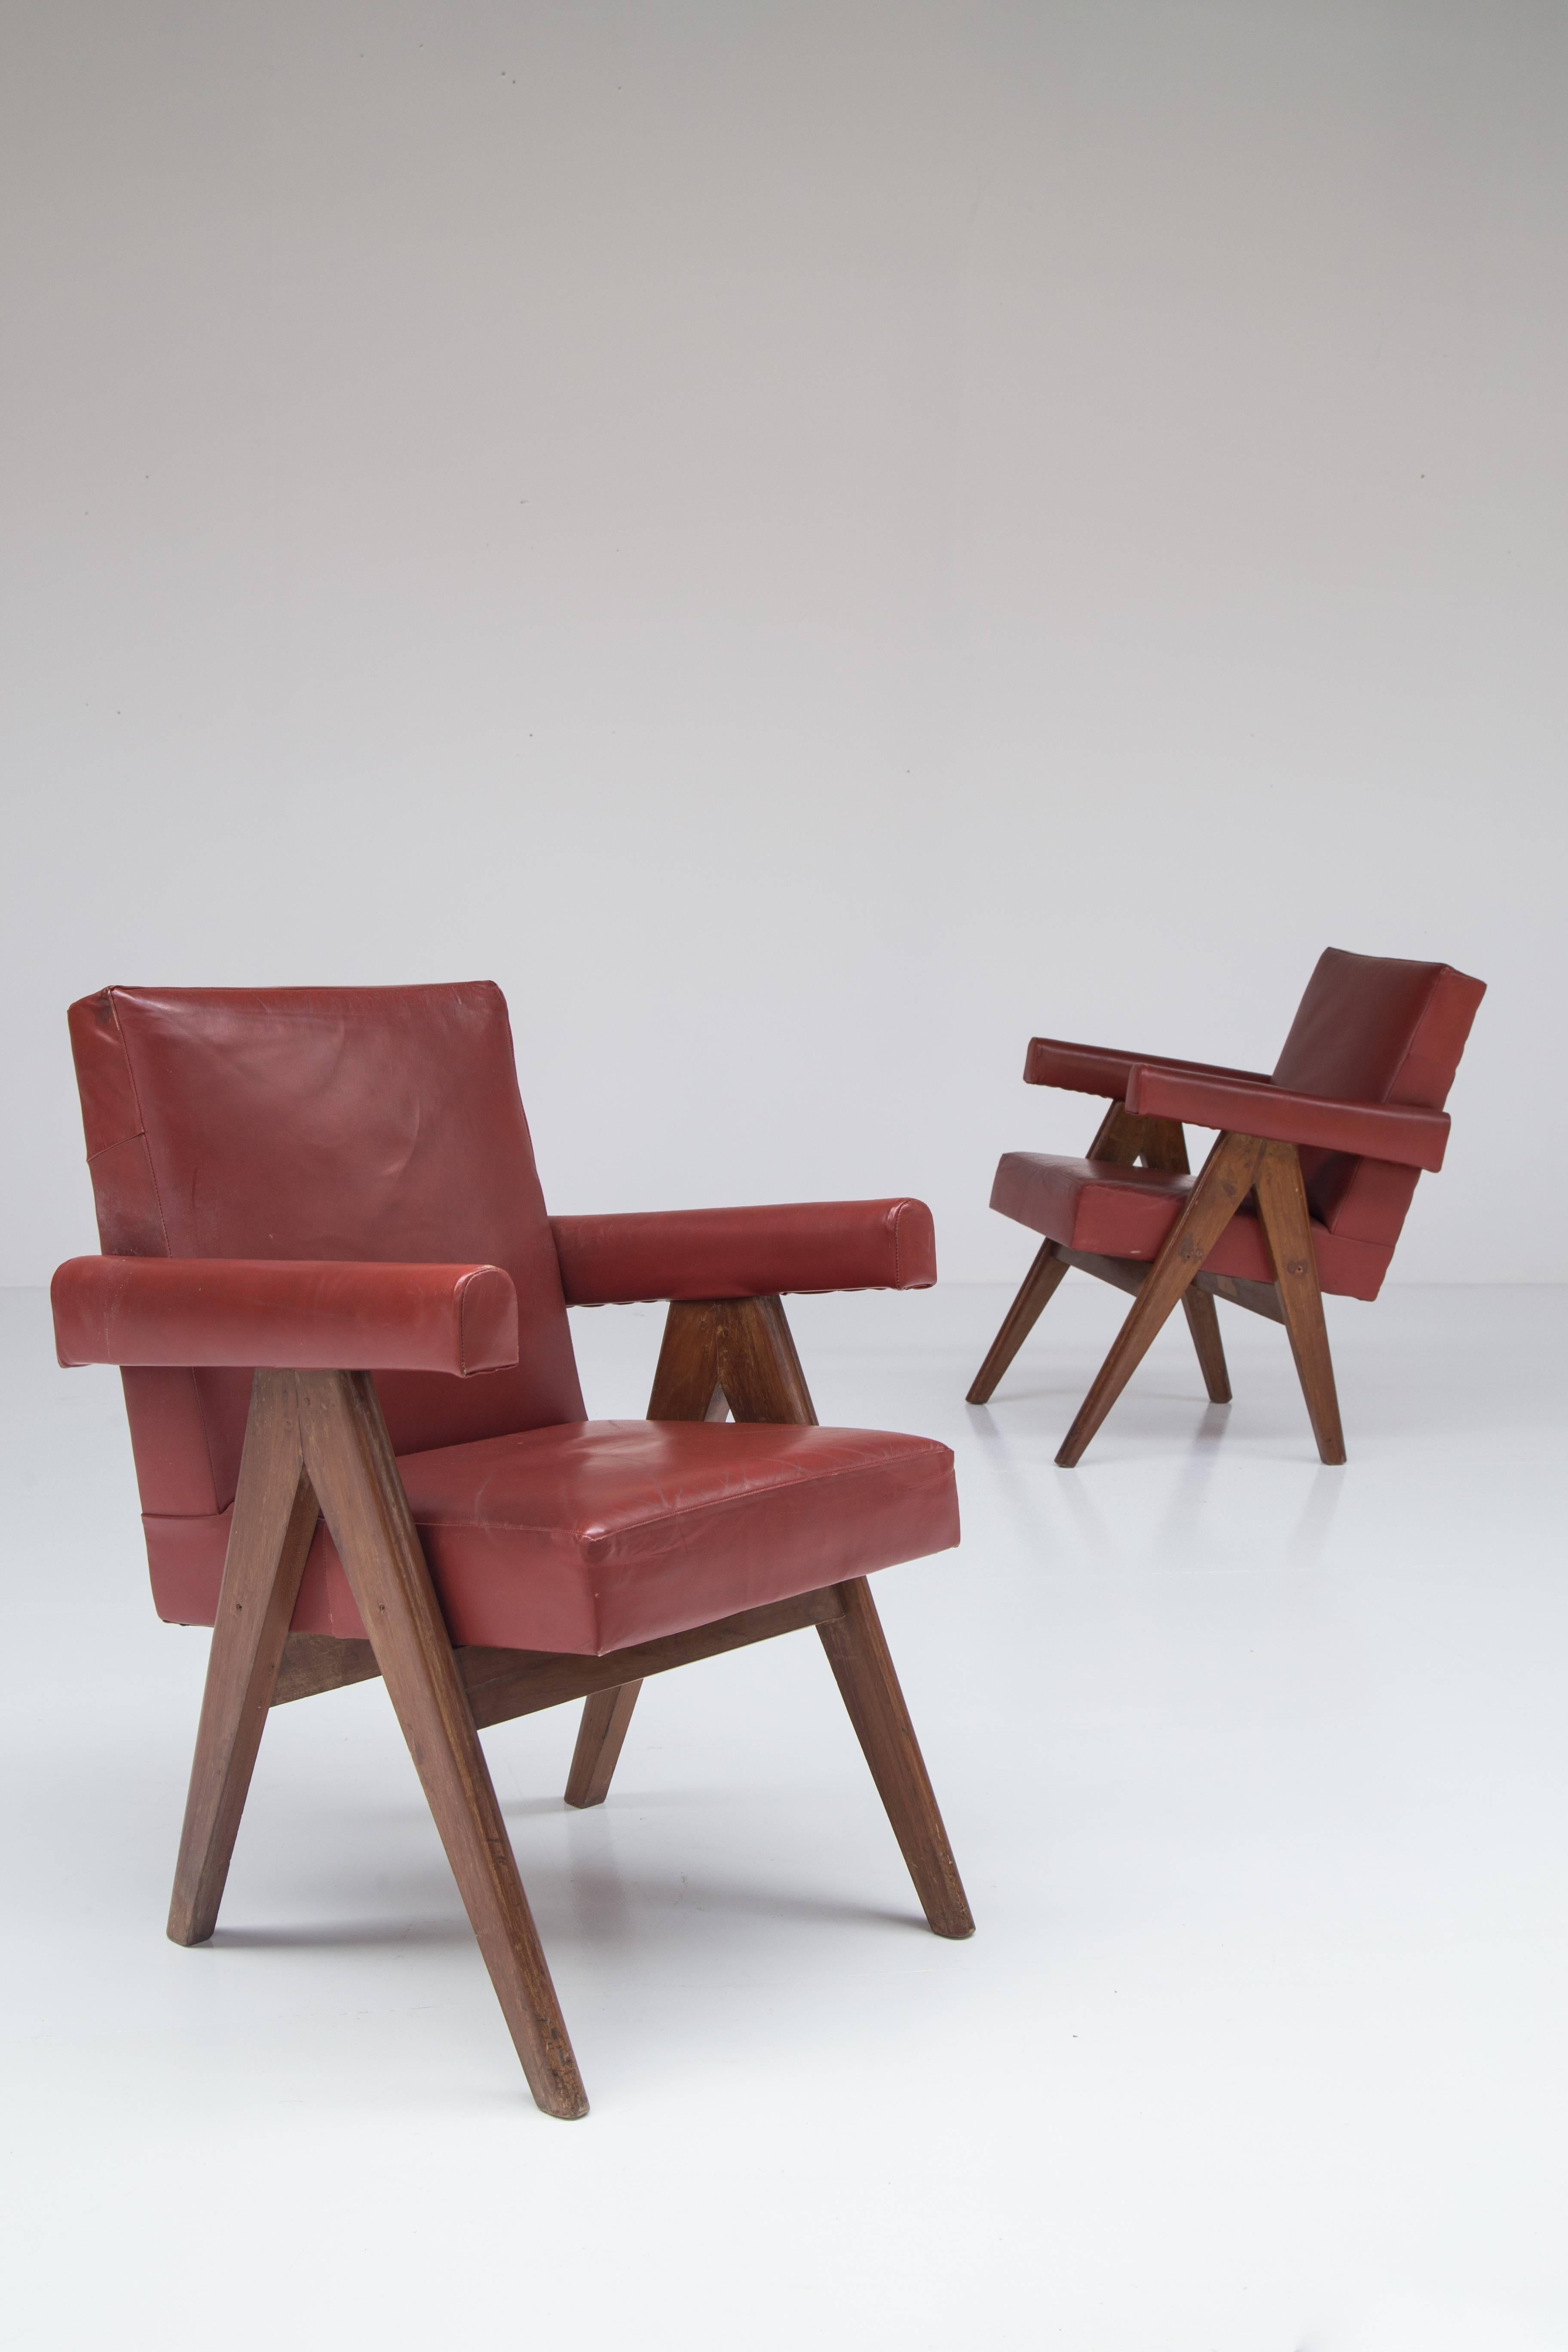 Pierre Jeanneret 'Committee' Lounge Chairs 1